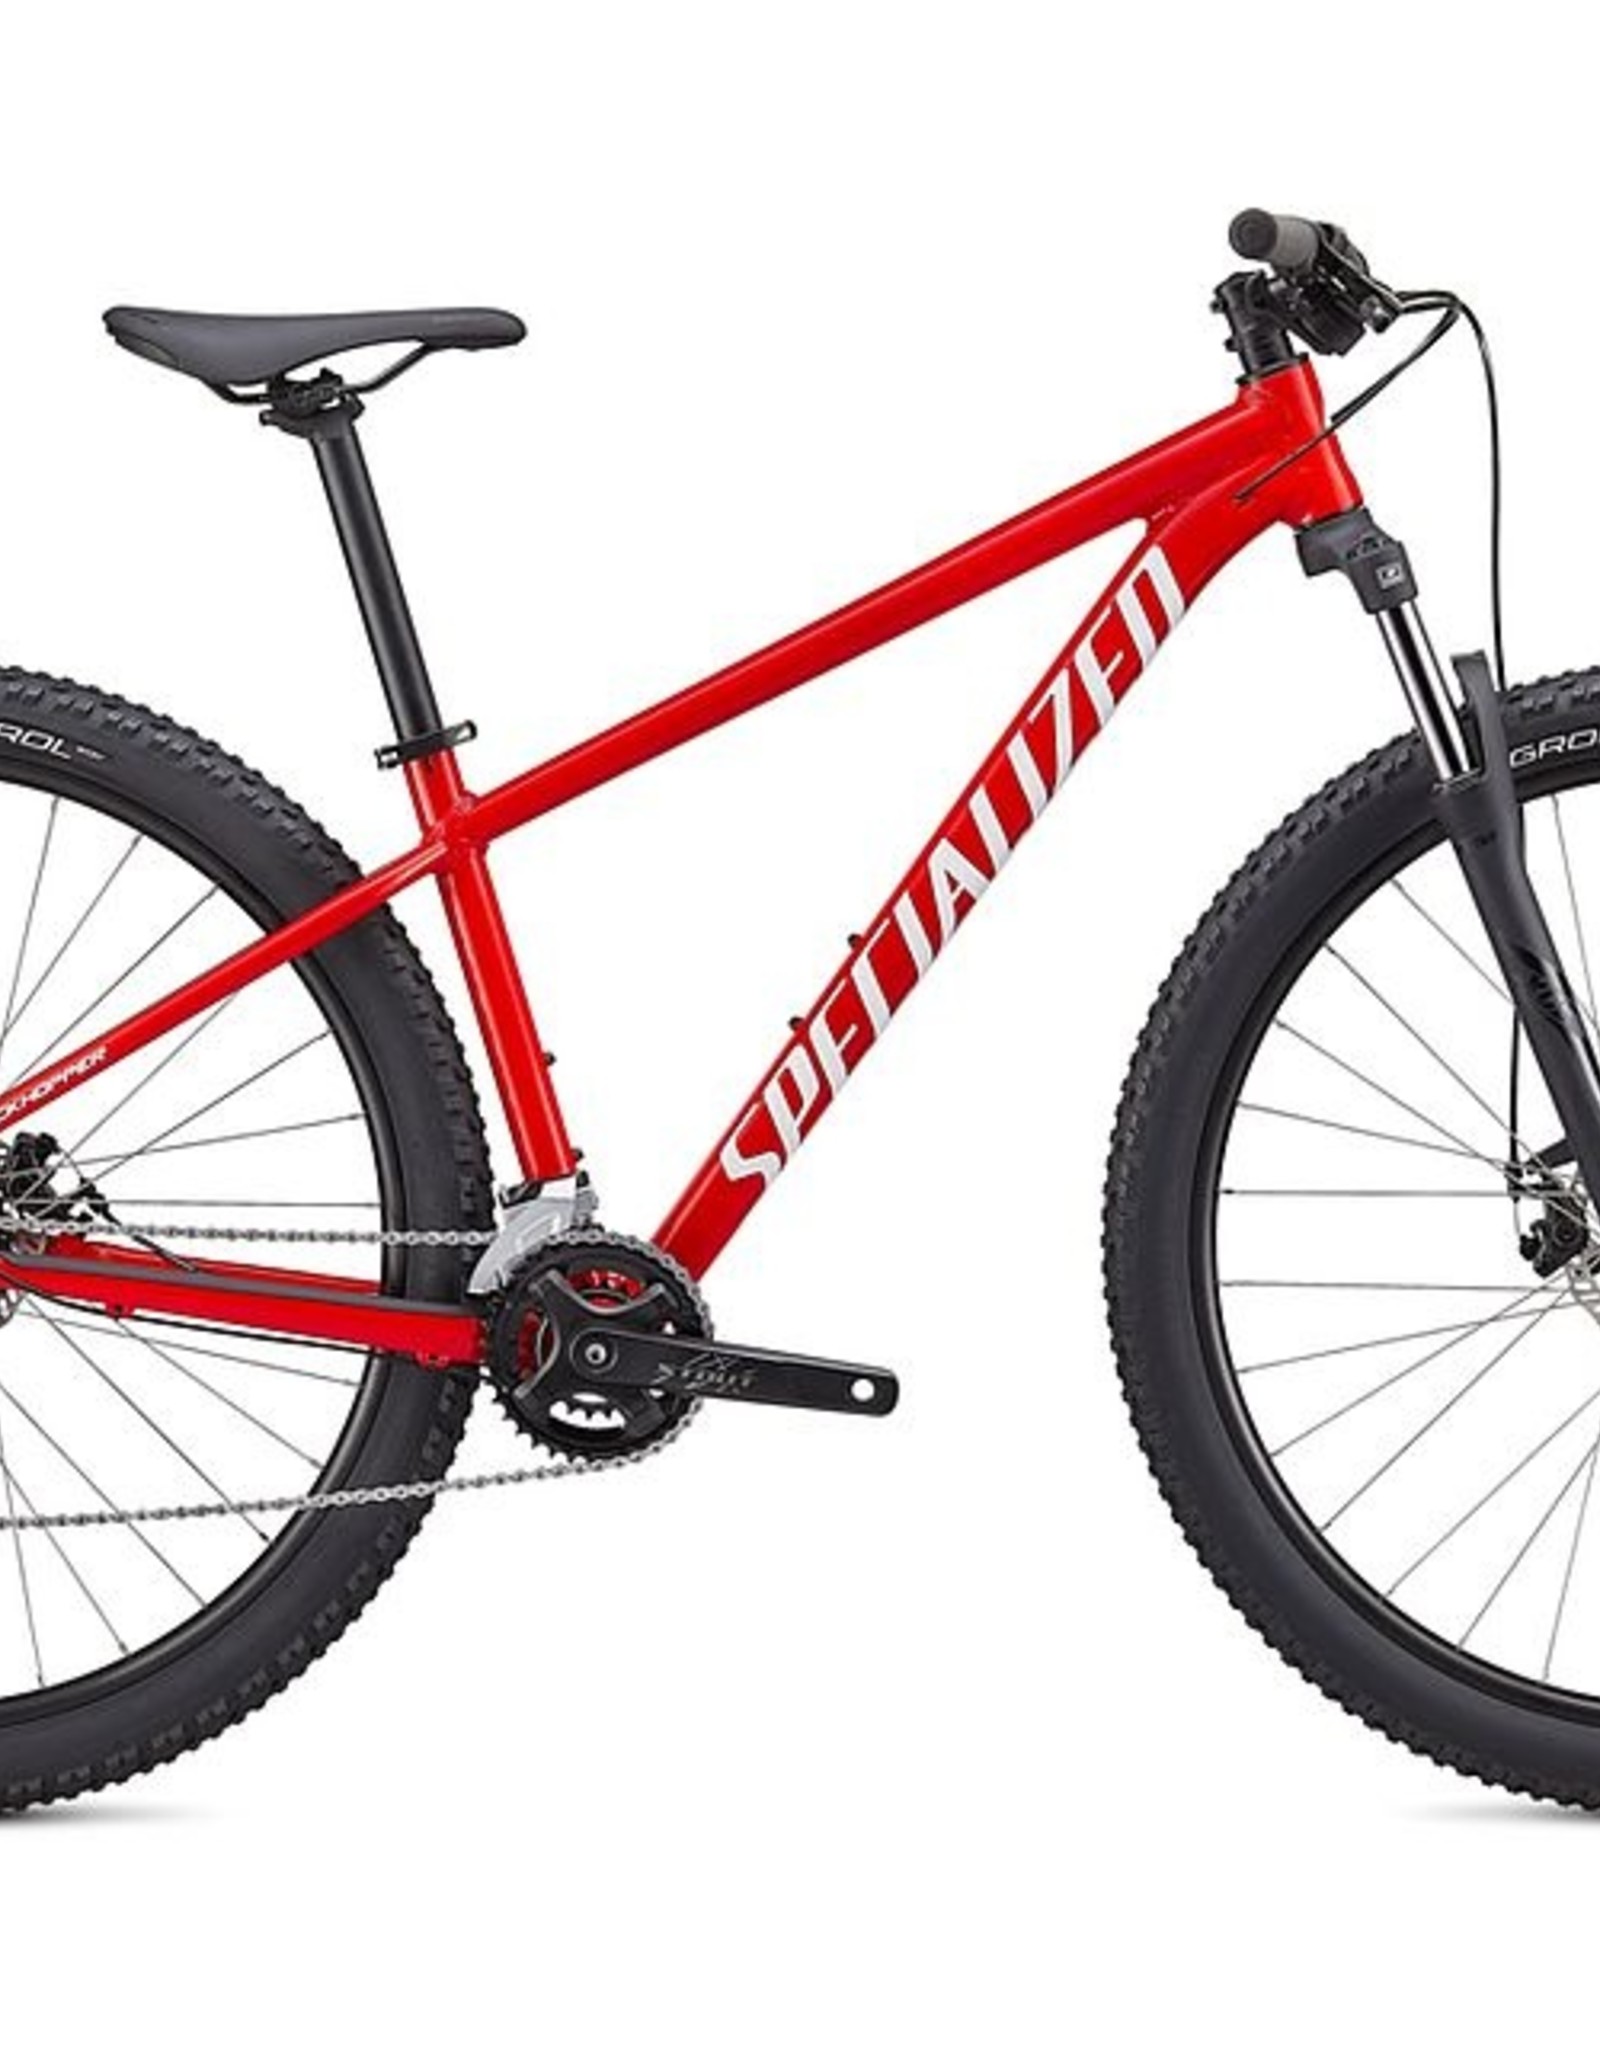 Specialized ROCKHOPPER 29 Large GLOSS FLO RED/WHITE